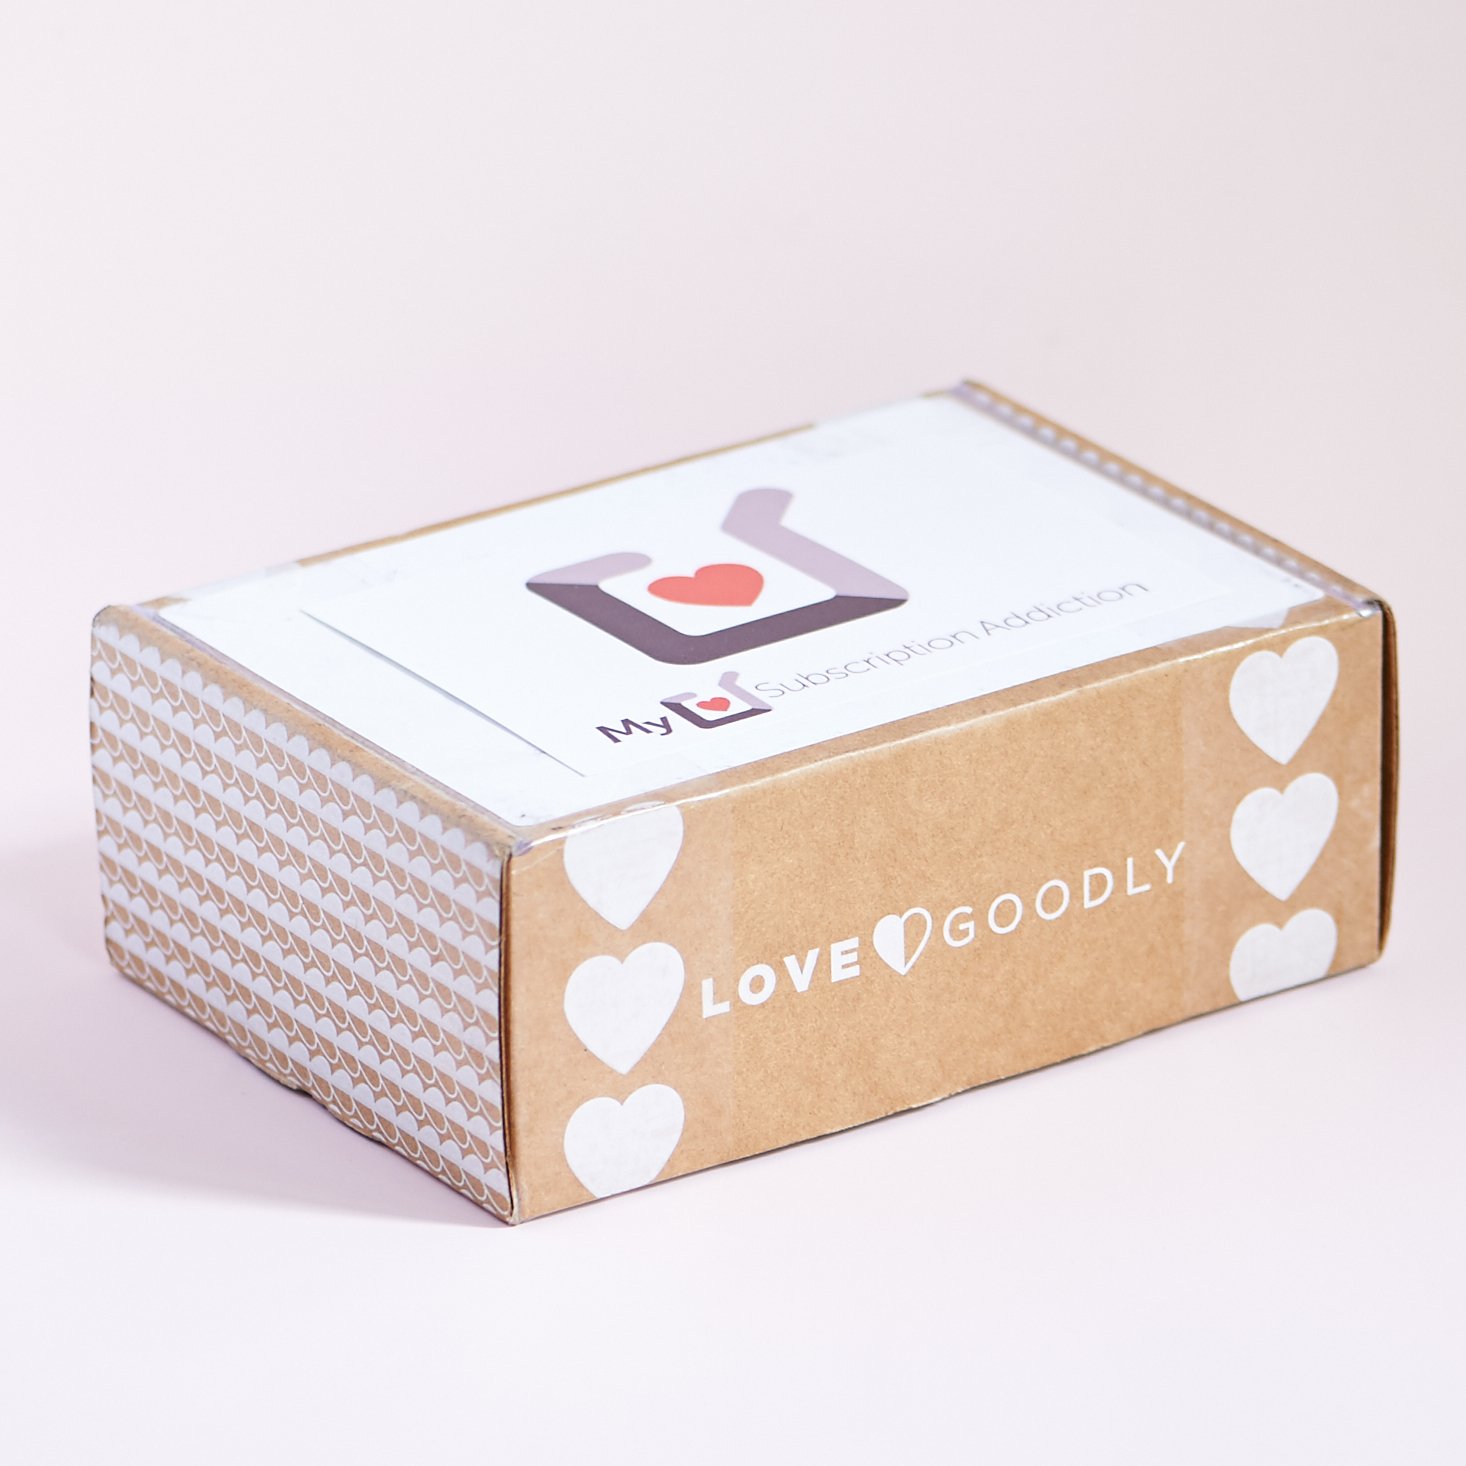 Love Goodly Cyber Monday Deal – 25% Off + Free Nail Polish!